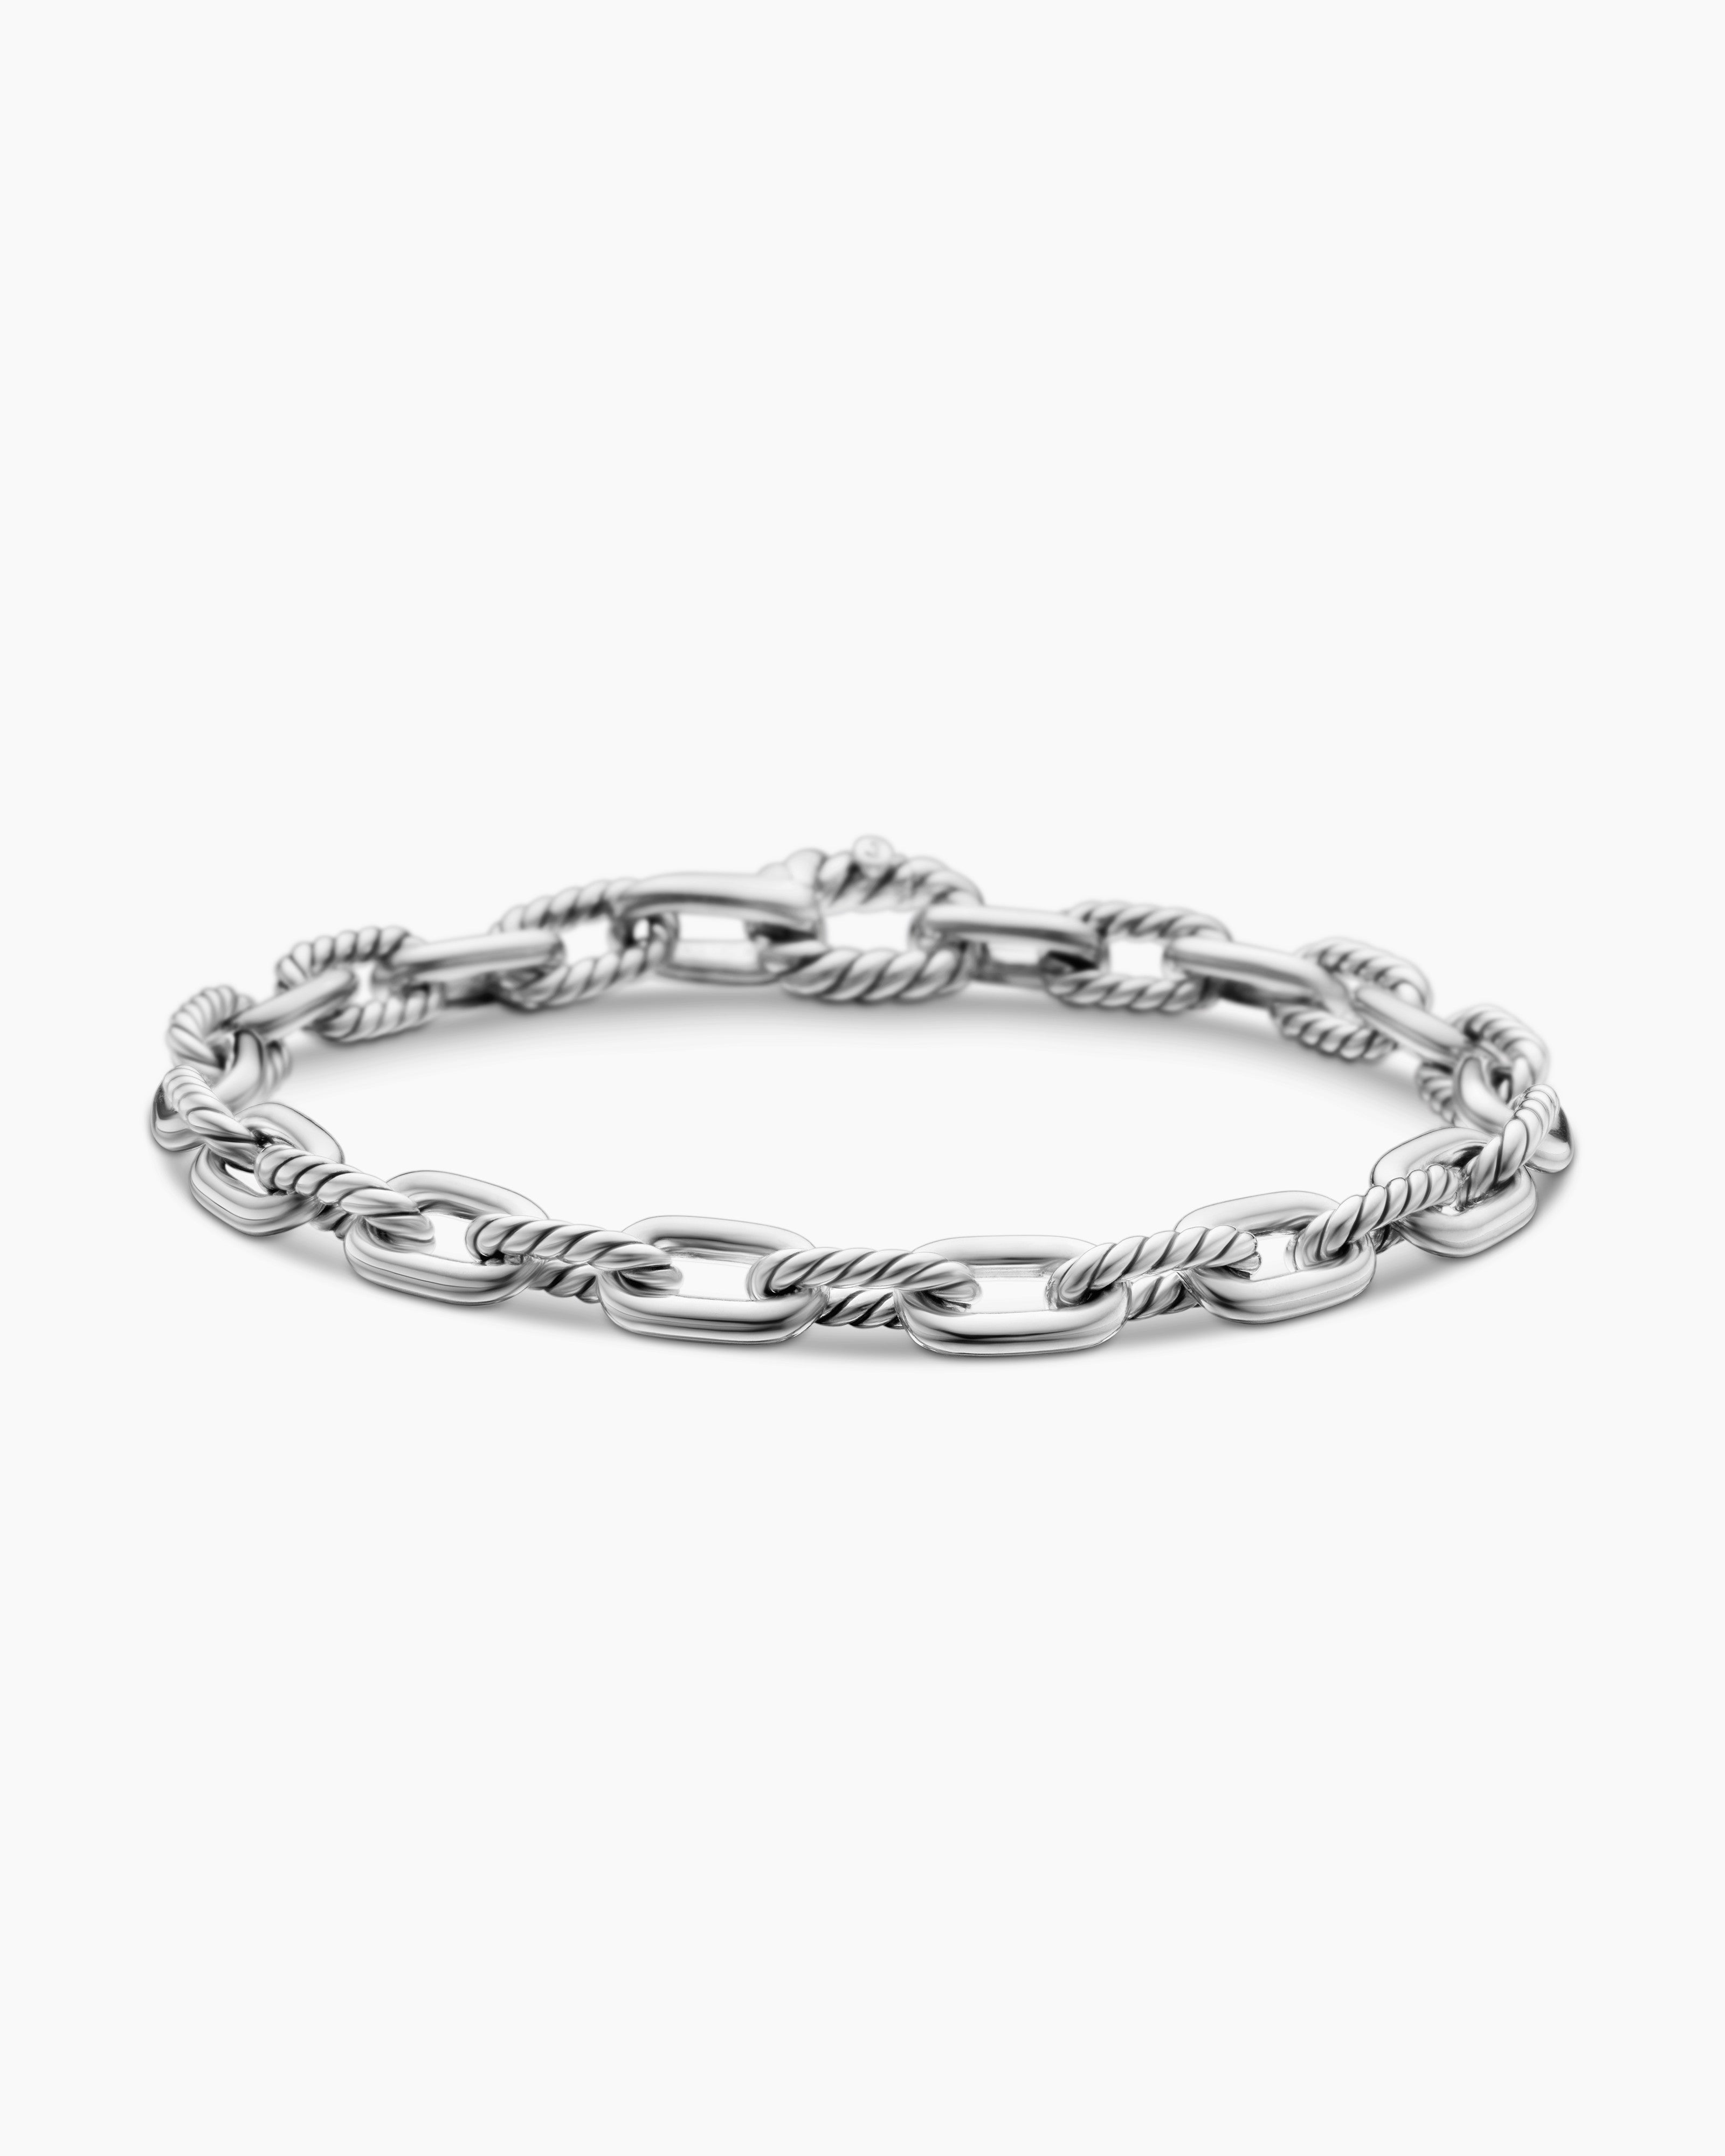 DY Madison® Chain Bracelet in Sterling Silver, 5.5mm